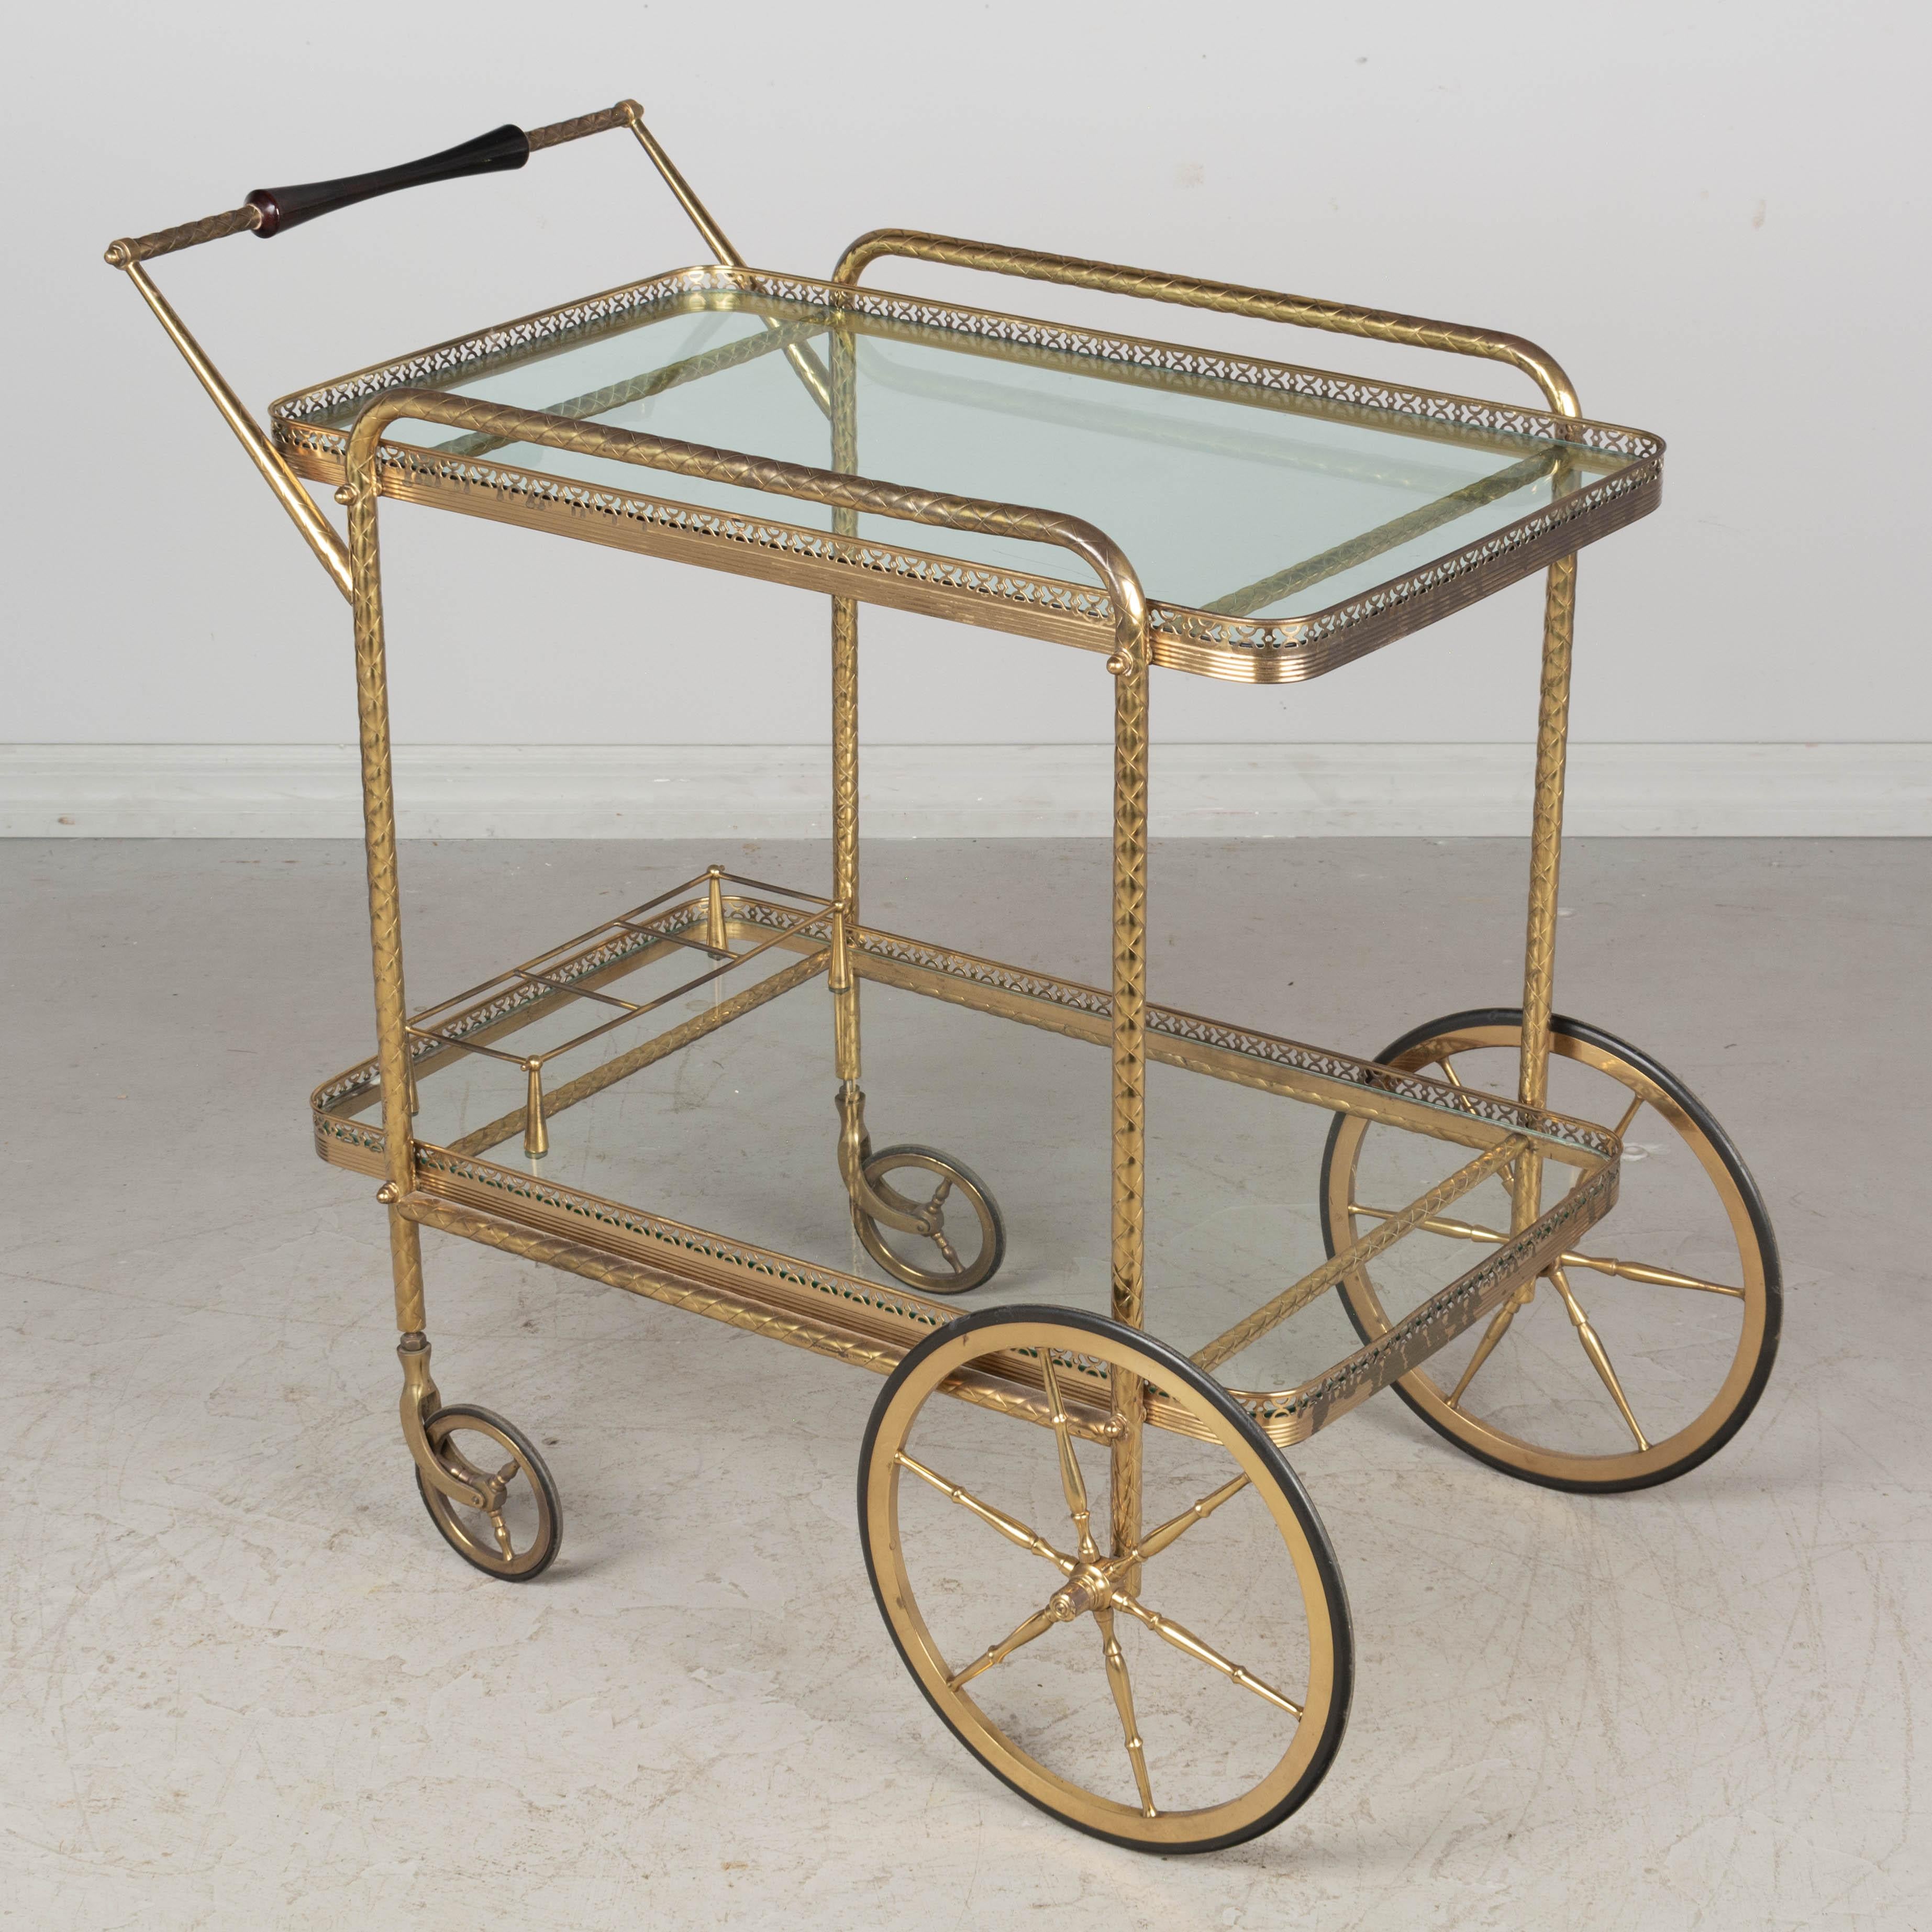 A Mid-Century modern Italian brass bar cart with mahogany handle and glass shelves with bottle rack. Nice patina, as found, but may be polished to a high shine if desired. Rolls smoothly.
Contact us for a competitive shipping quotation. Please